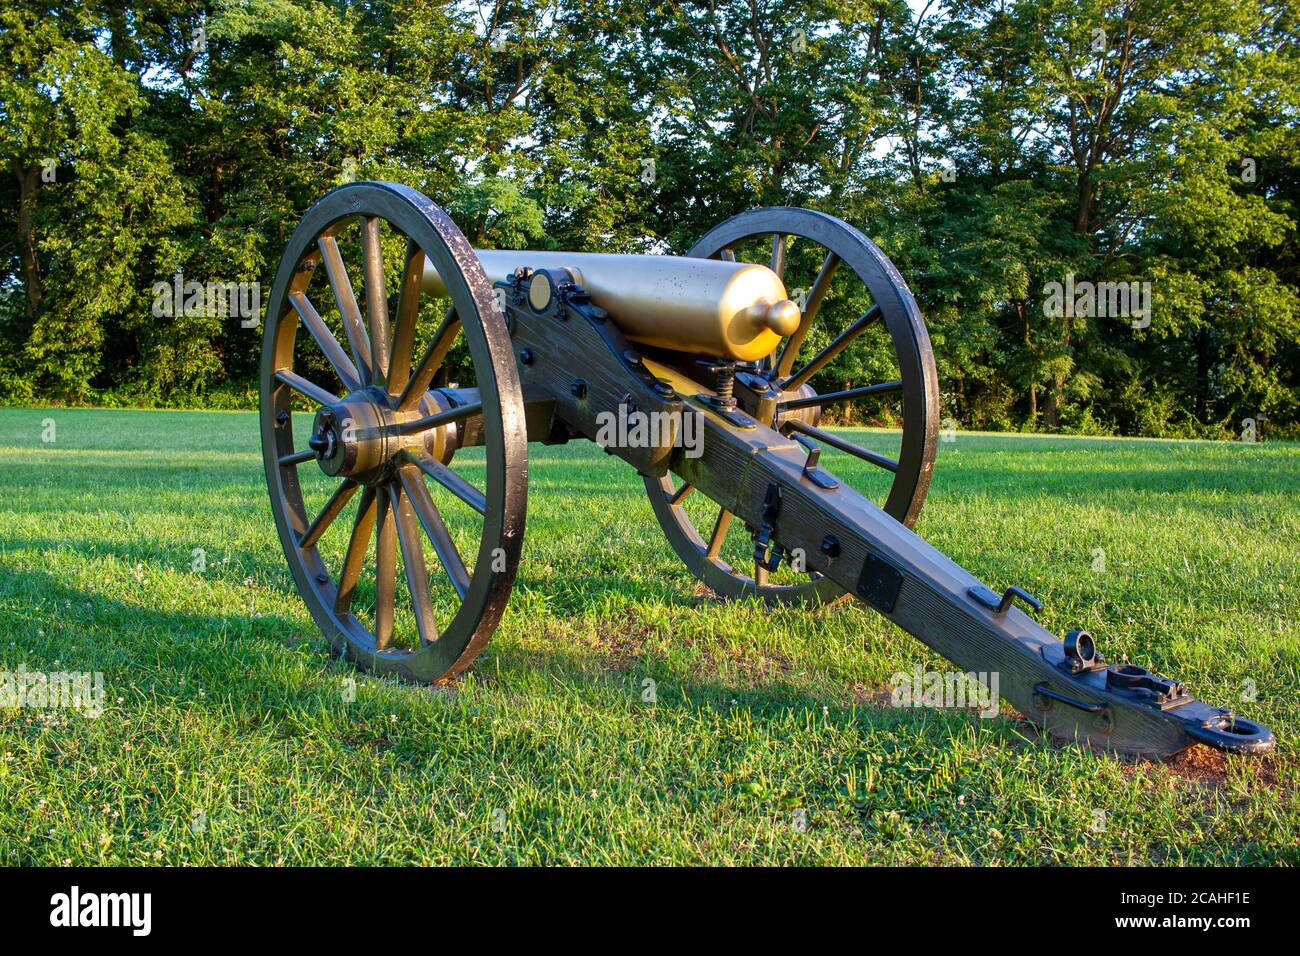 Maryland, USA 08/05/2020: Close up image  of a civil war era bronze Howitzer M1841 12 pounder field cannon located at the Monocacy Battlefield where u Stock Photo